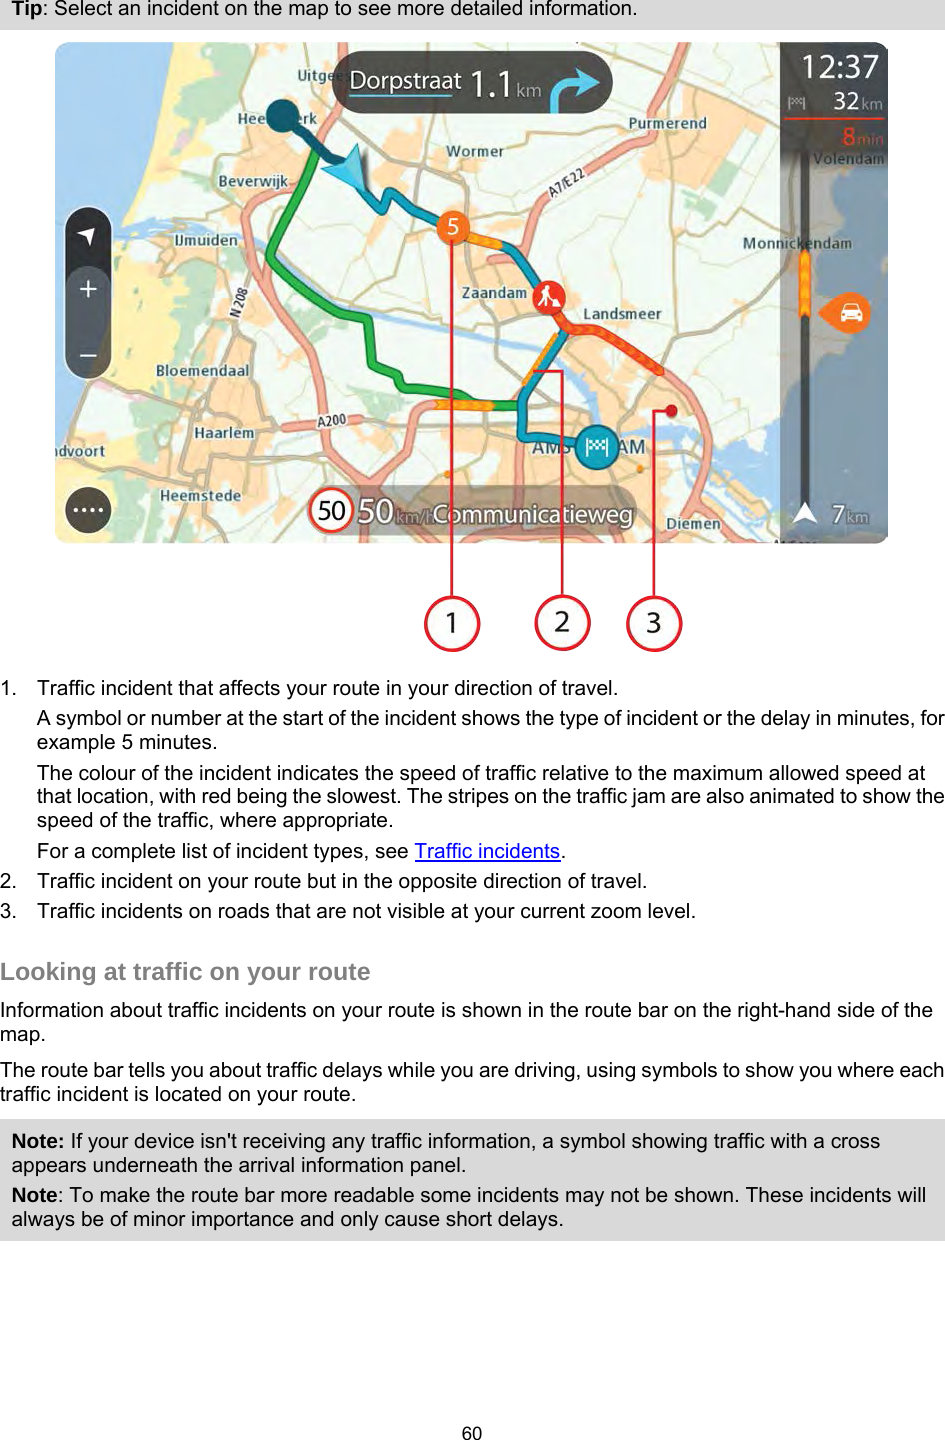  Tip: Select an incident on the map to see more detailed information.  1. Traffic incident that affects your route in your direction of travel. A symbol or number at the start of the incident shows the type of incident or the delay in minutes, for example 5 minutes.  The colour of the incident indicates the speed of traffic relative to the maximum allowed speed at that location, with red being the slowest. The stripes on the traffic jam are also animated to show the speed of the traffic, where appropriate.   For a complete list of incident types, see Traffic incidents. 2. Traffic incident on your route but in the opposite direction of travel. 3. Traffic incidents on roads that are not visible at your current zoom level.  Looking at traffic on your route Information about traffic incidents on your route is shown in the route bar on the right-hand side of the map. The route bar tells you about traffic delays while you are driving, using symbols to show you where each traffic incident is located on your route. Note: If your device isn&apos;t receiving any traffic information, a symbol showing traffic with a cross appears underneath the arrival information panel. Note: To make the route bar more readable some incidents may not be shown. These incidents will always be of minor importance and only cause short delays. 60   